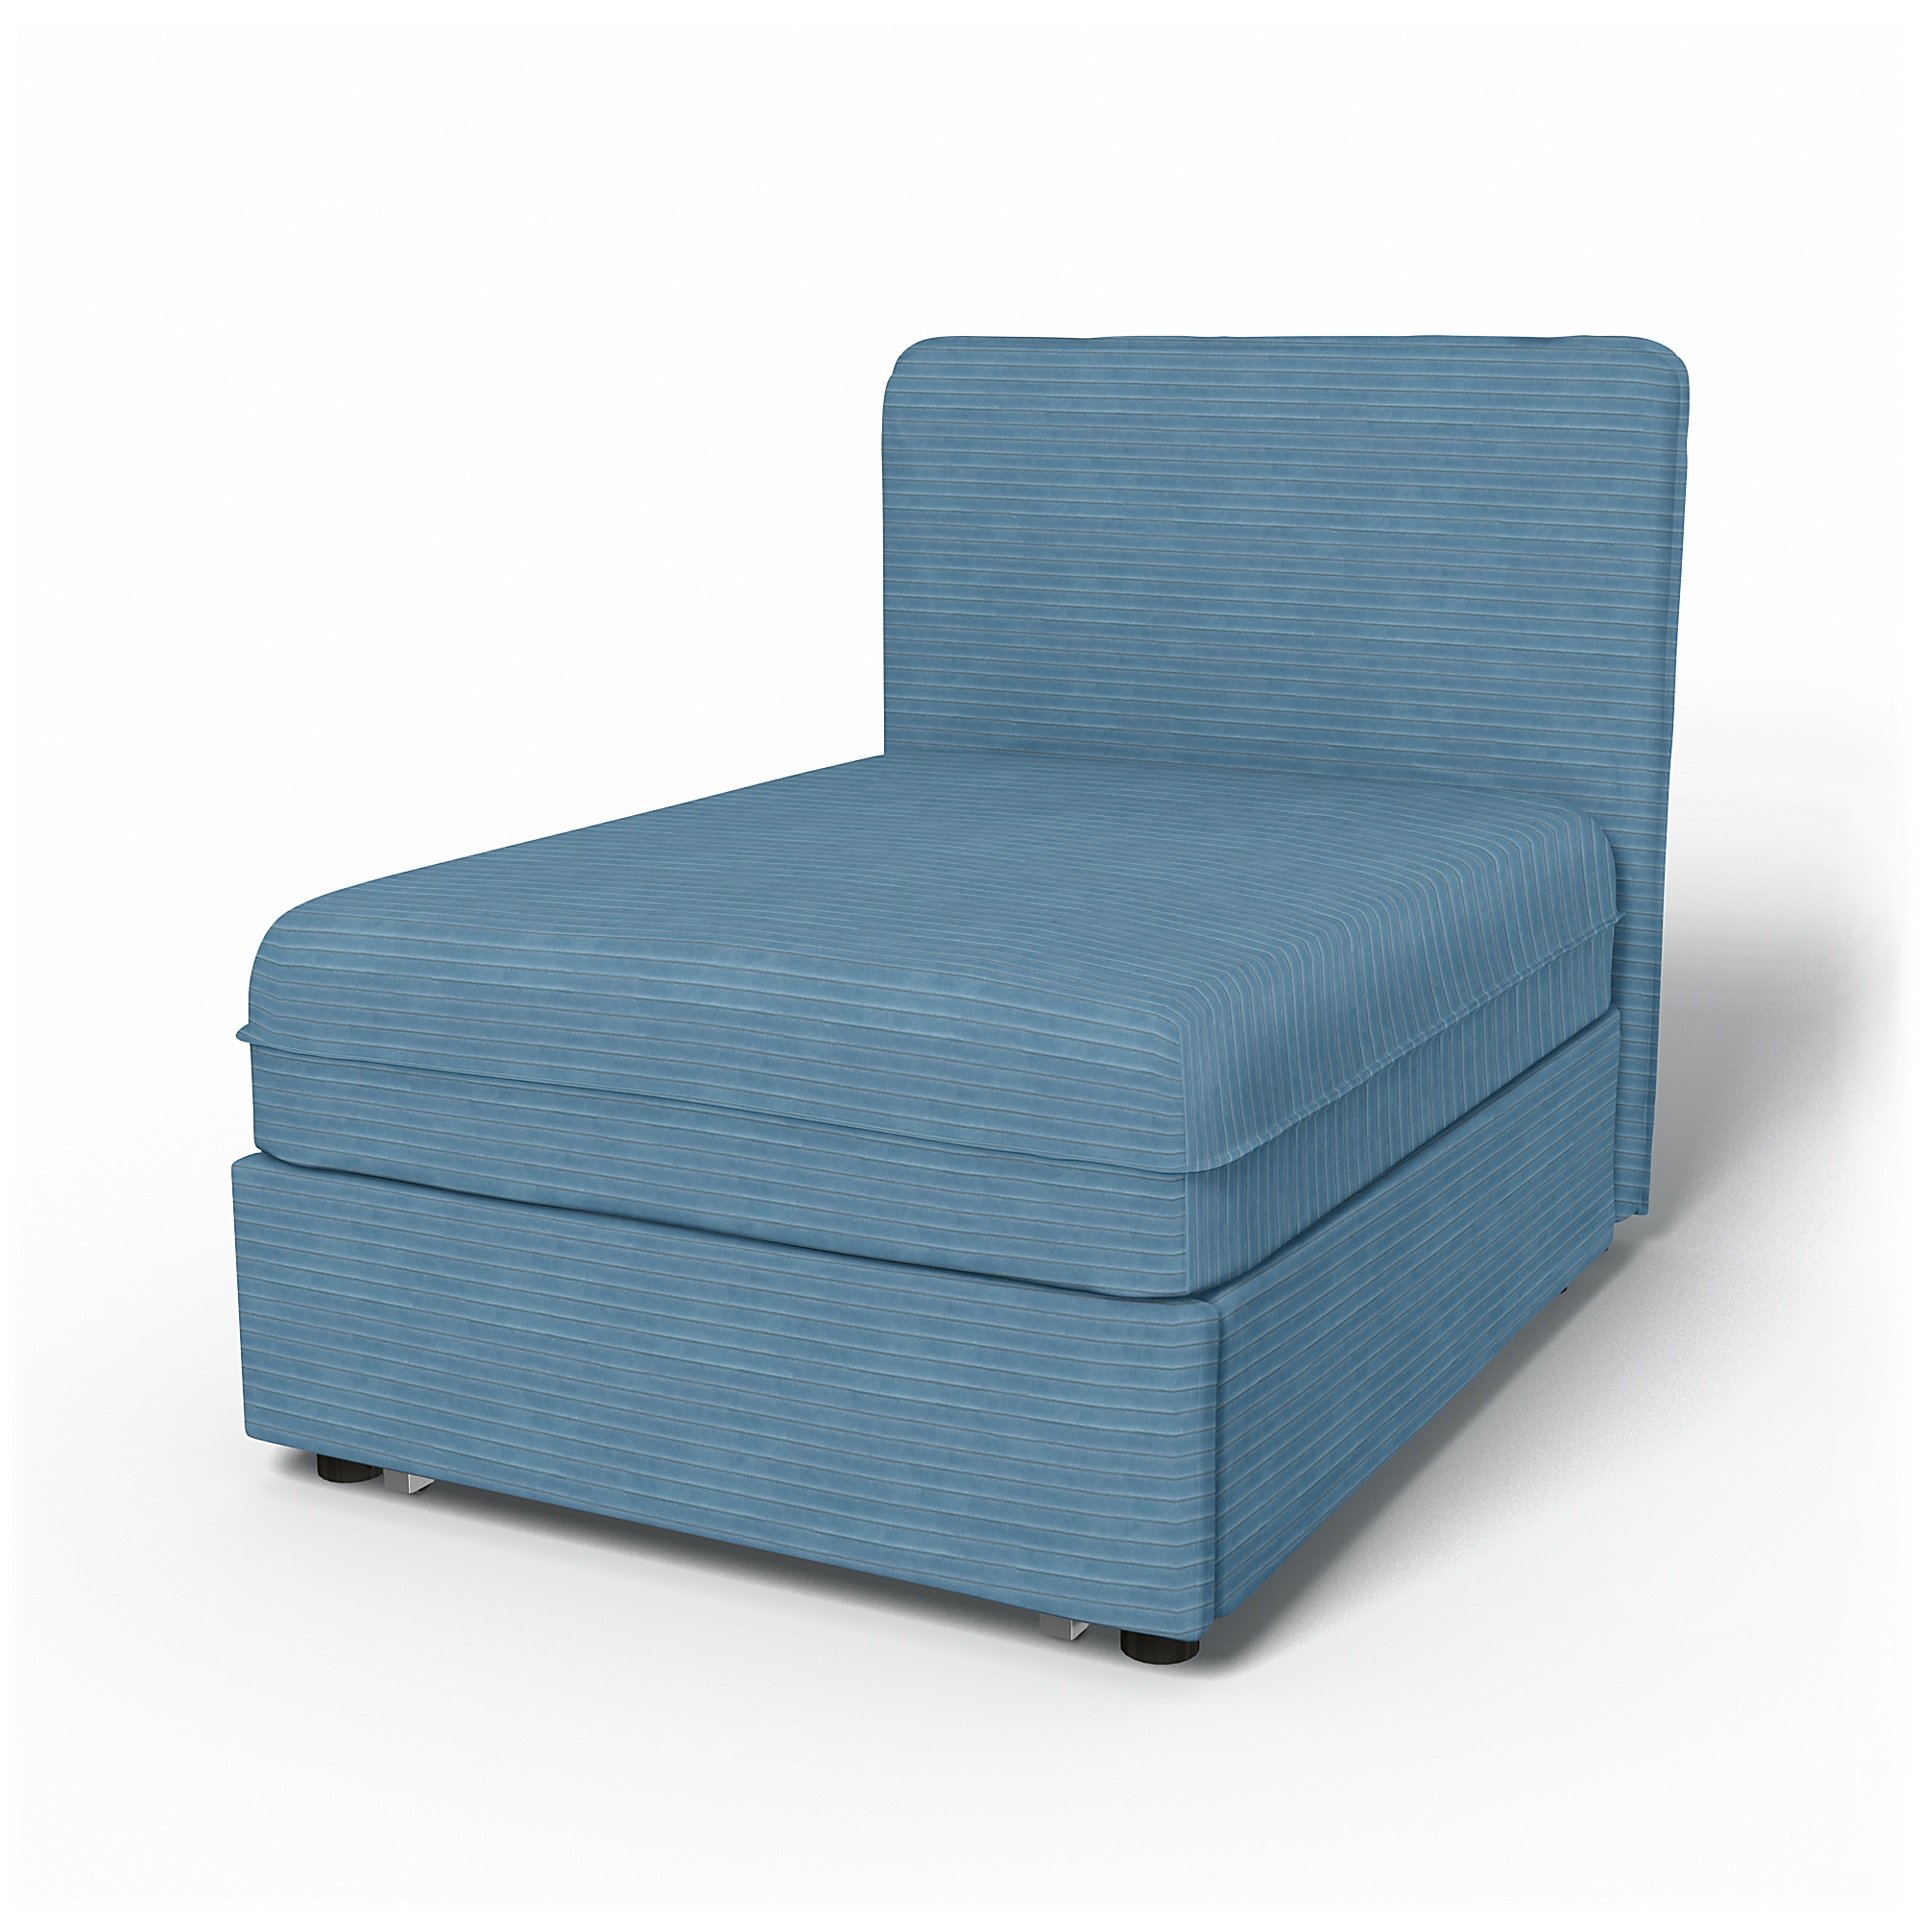 IKEA - Vallentuna Seat Module with Low Back Sofa Bed Cover 80x100 cm 32x39in, Sky Blue, Corduroy - B